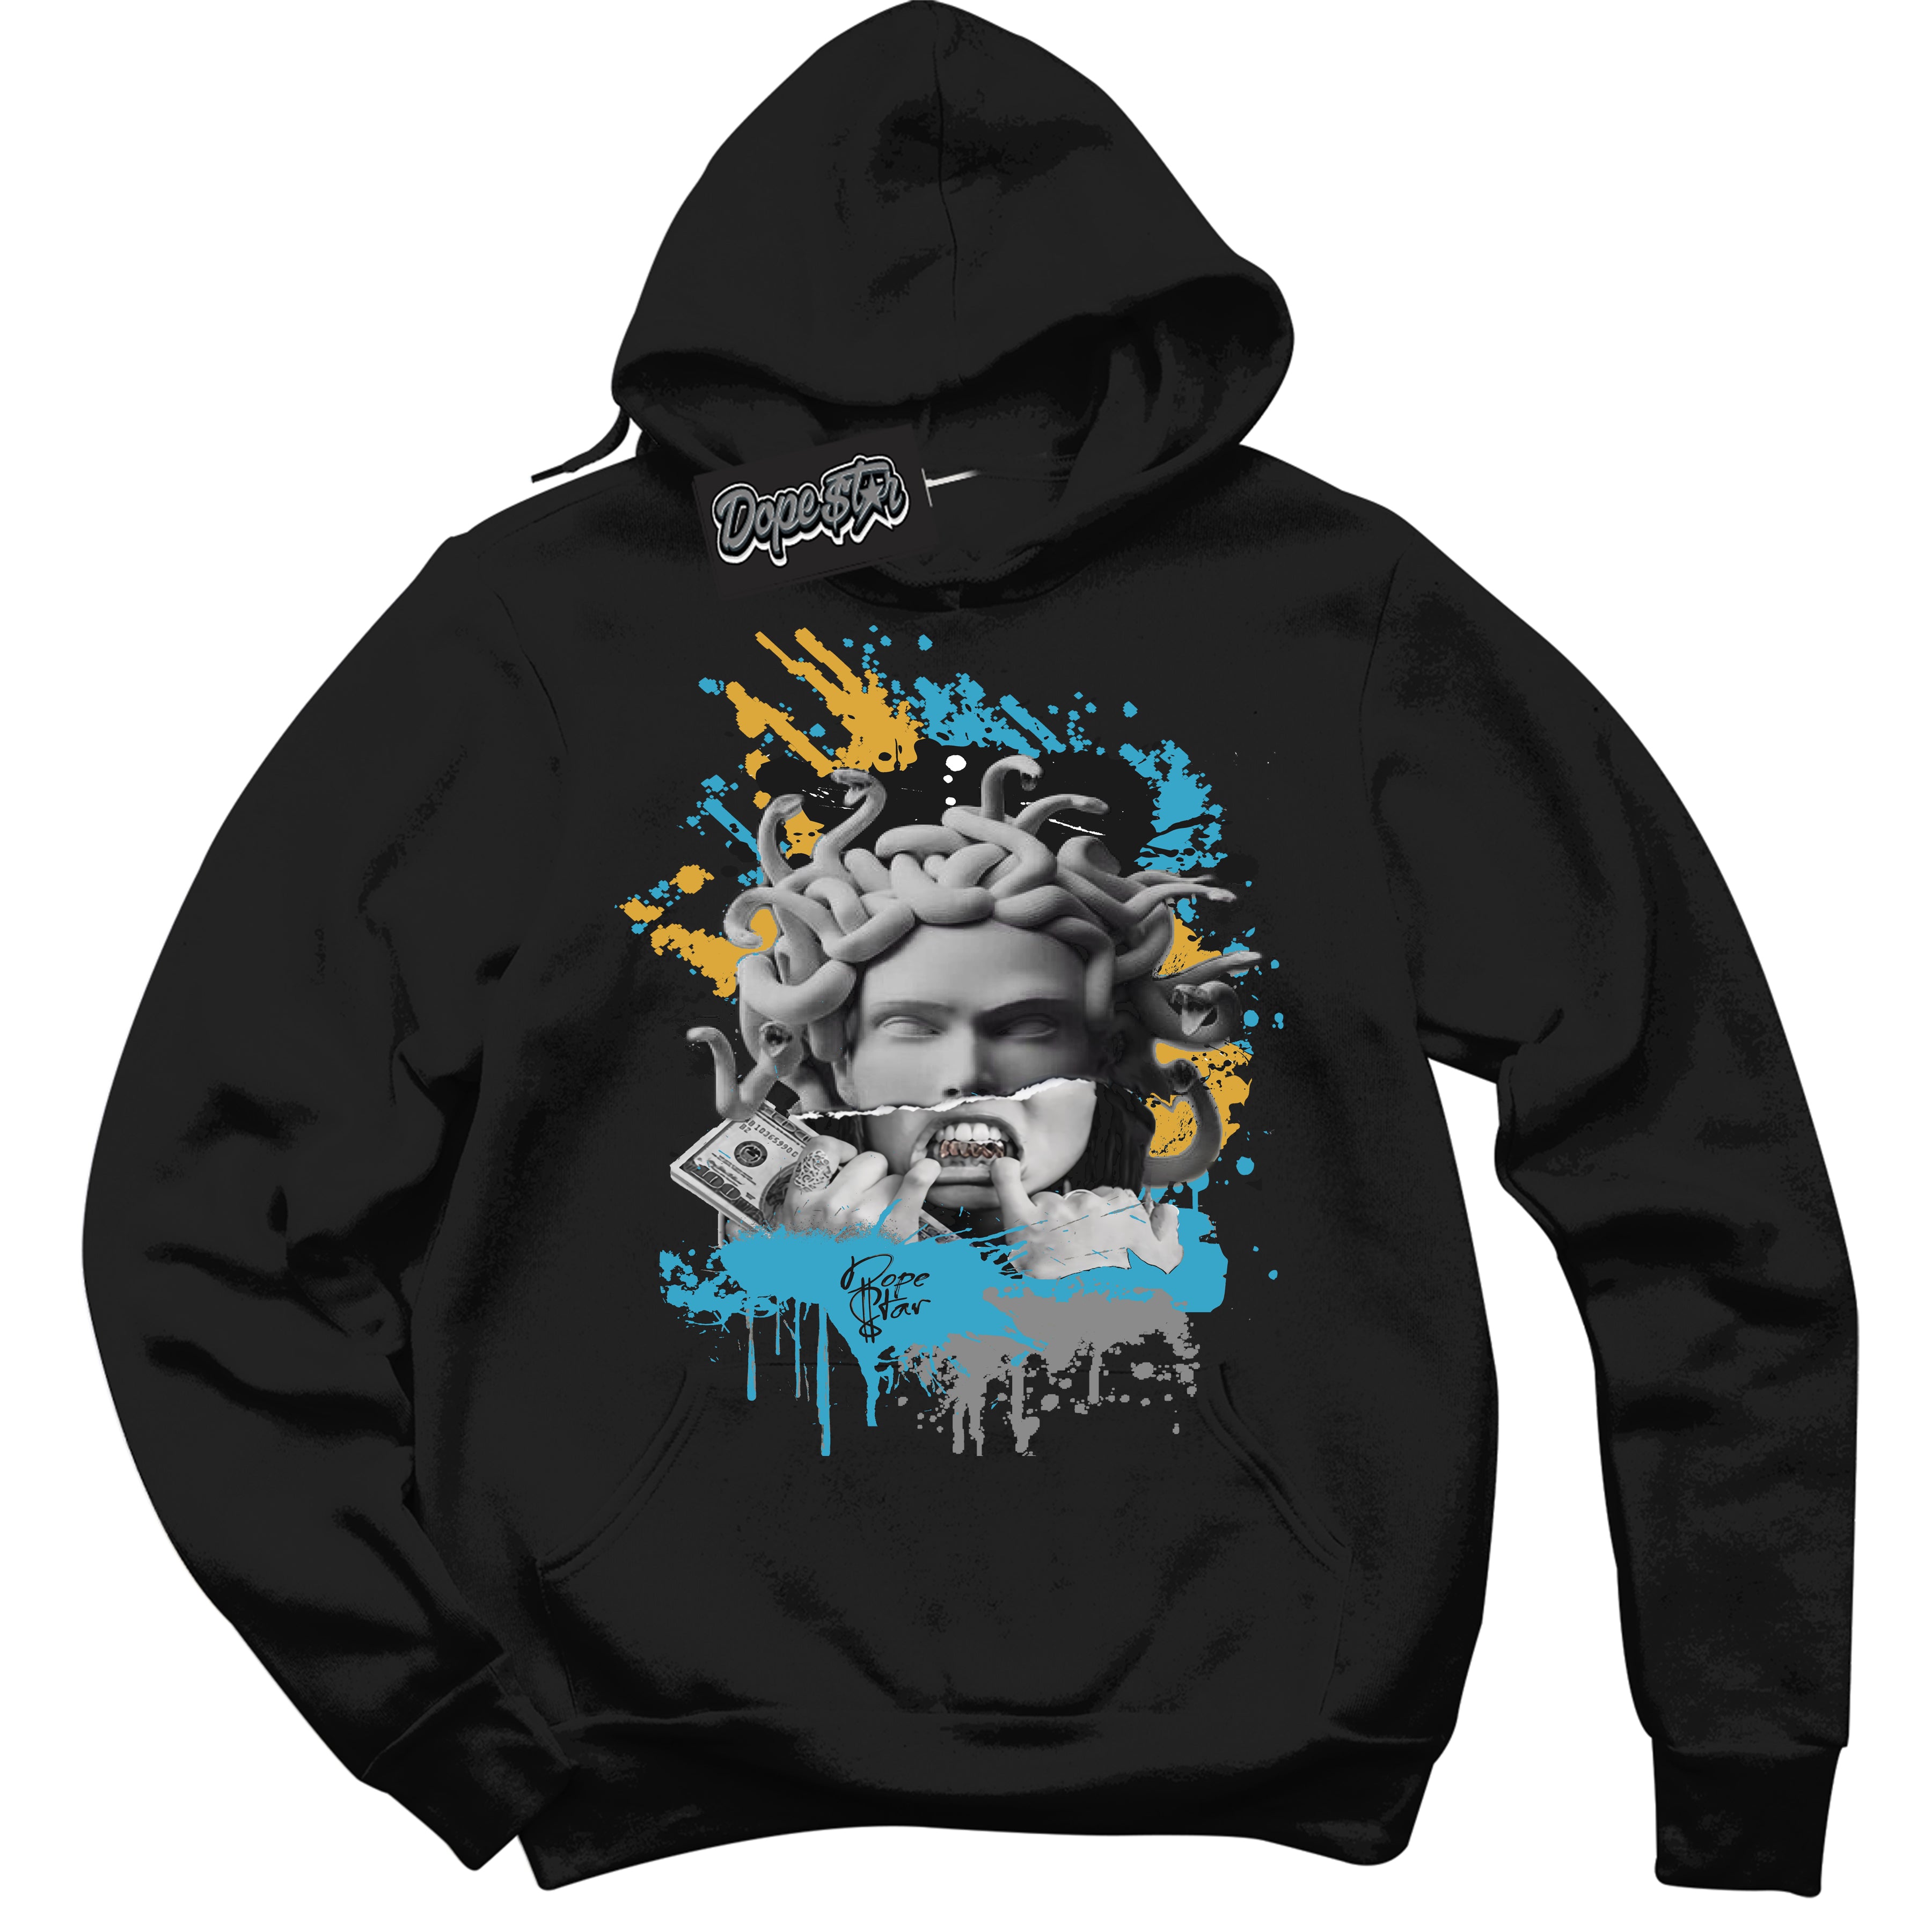 Cool Black Hoodie with “ Medusa ”  design that Perfectly Matches Aqua 5s Sneakers.